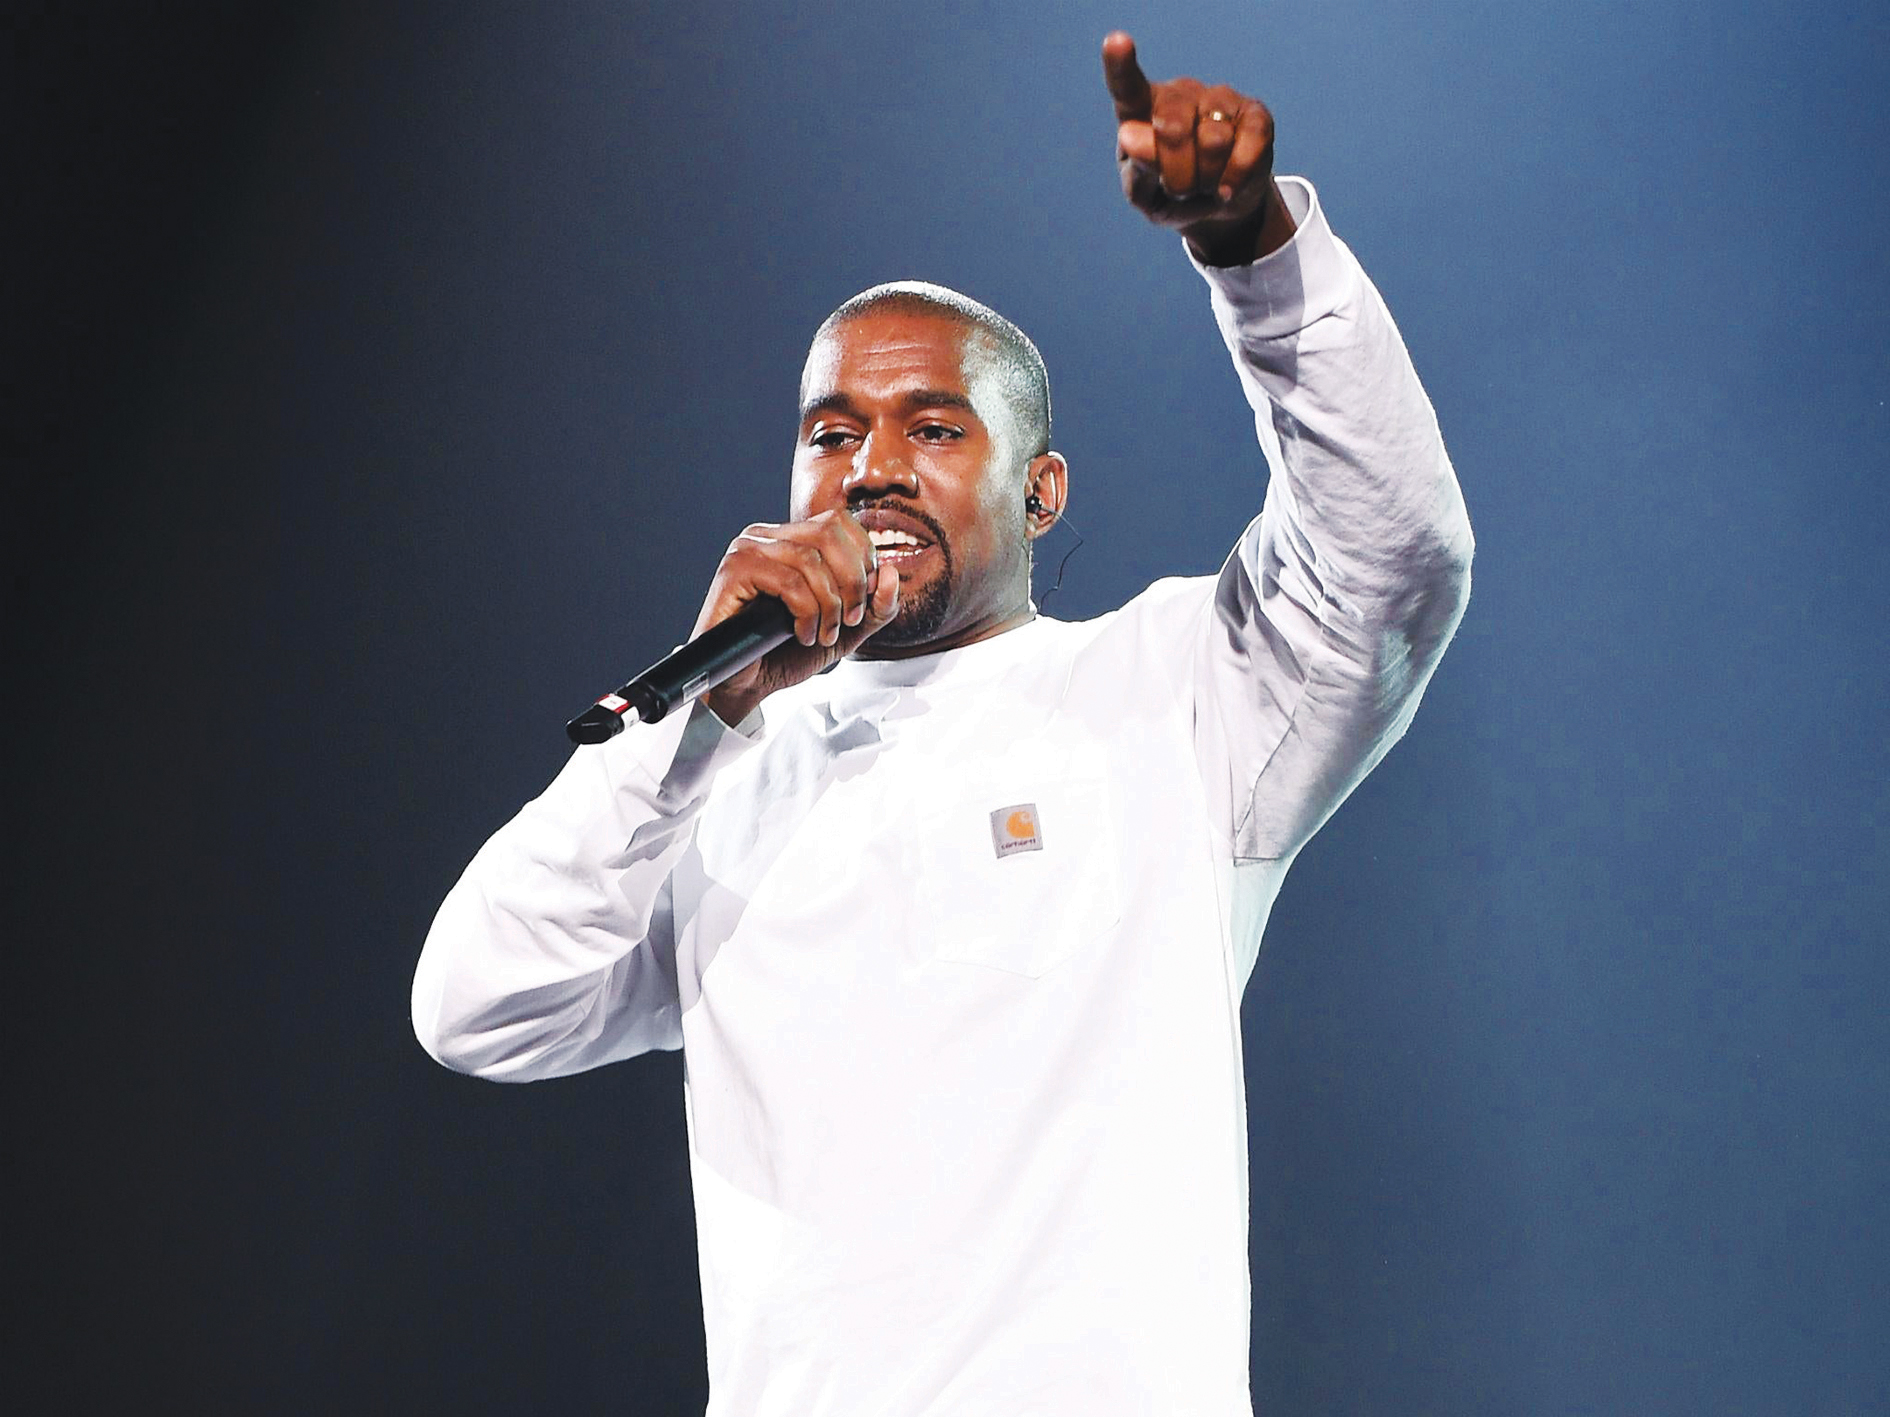 Read more about the article What is bipolar disorder, the condition Kanye West lives with?